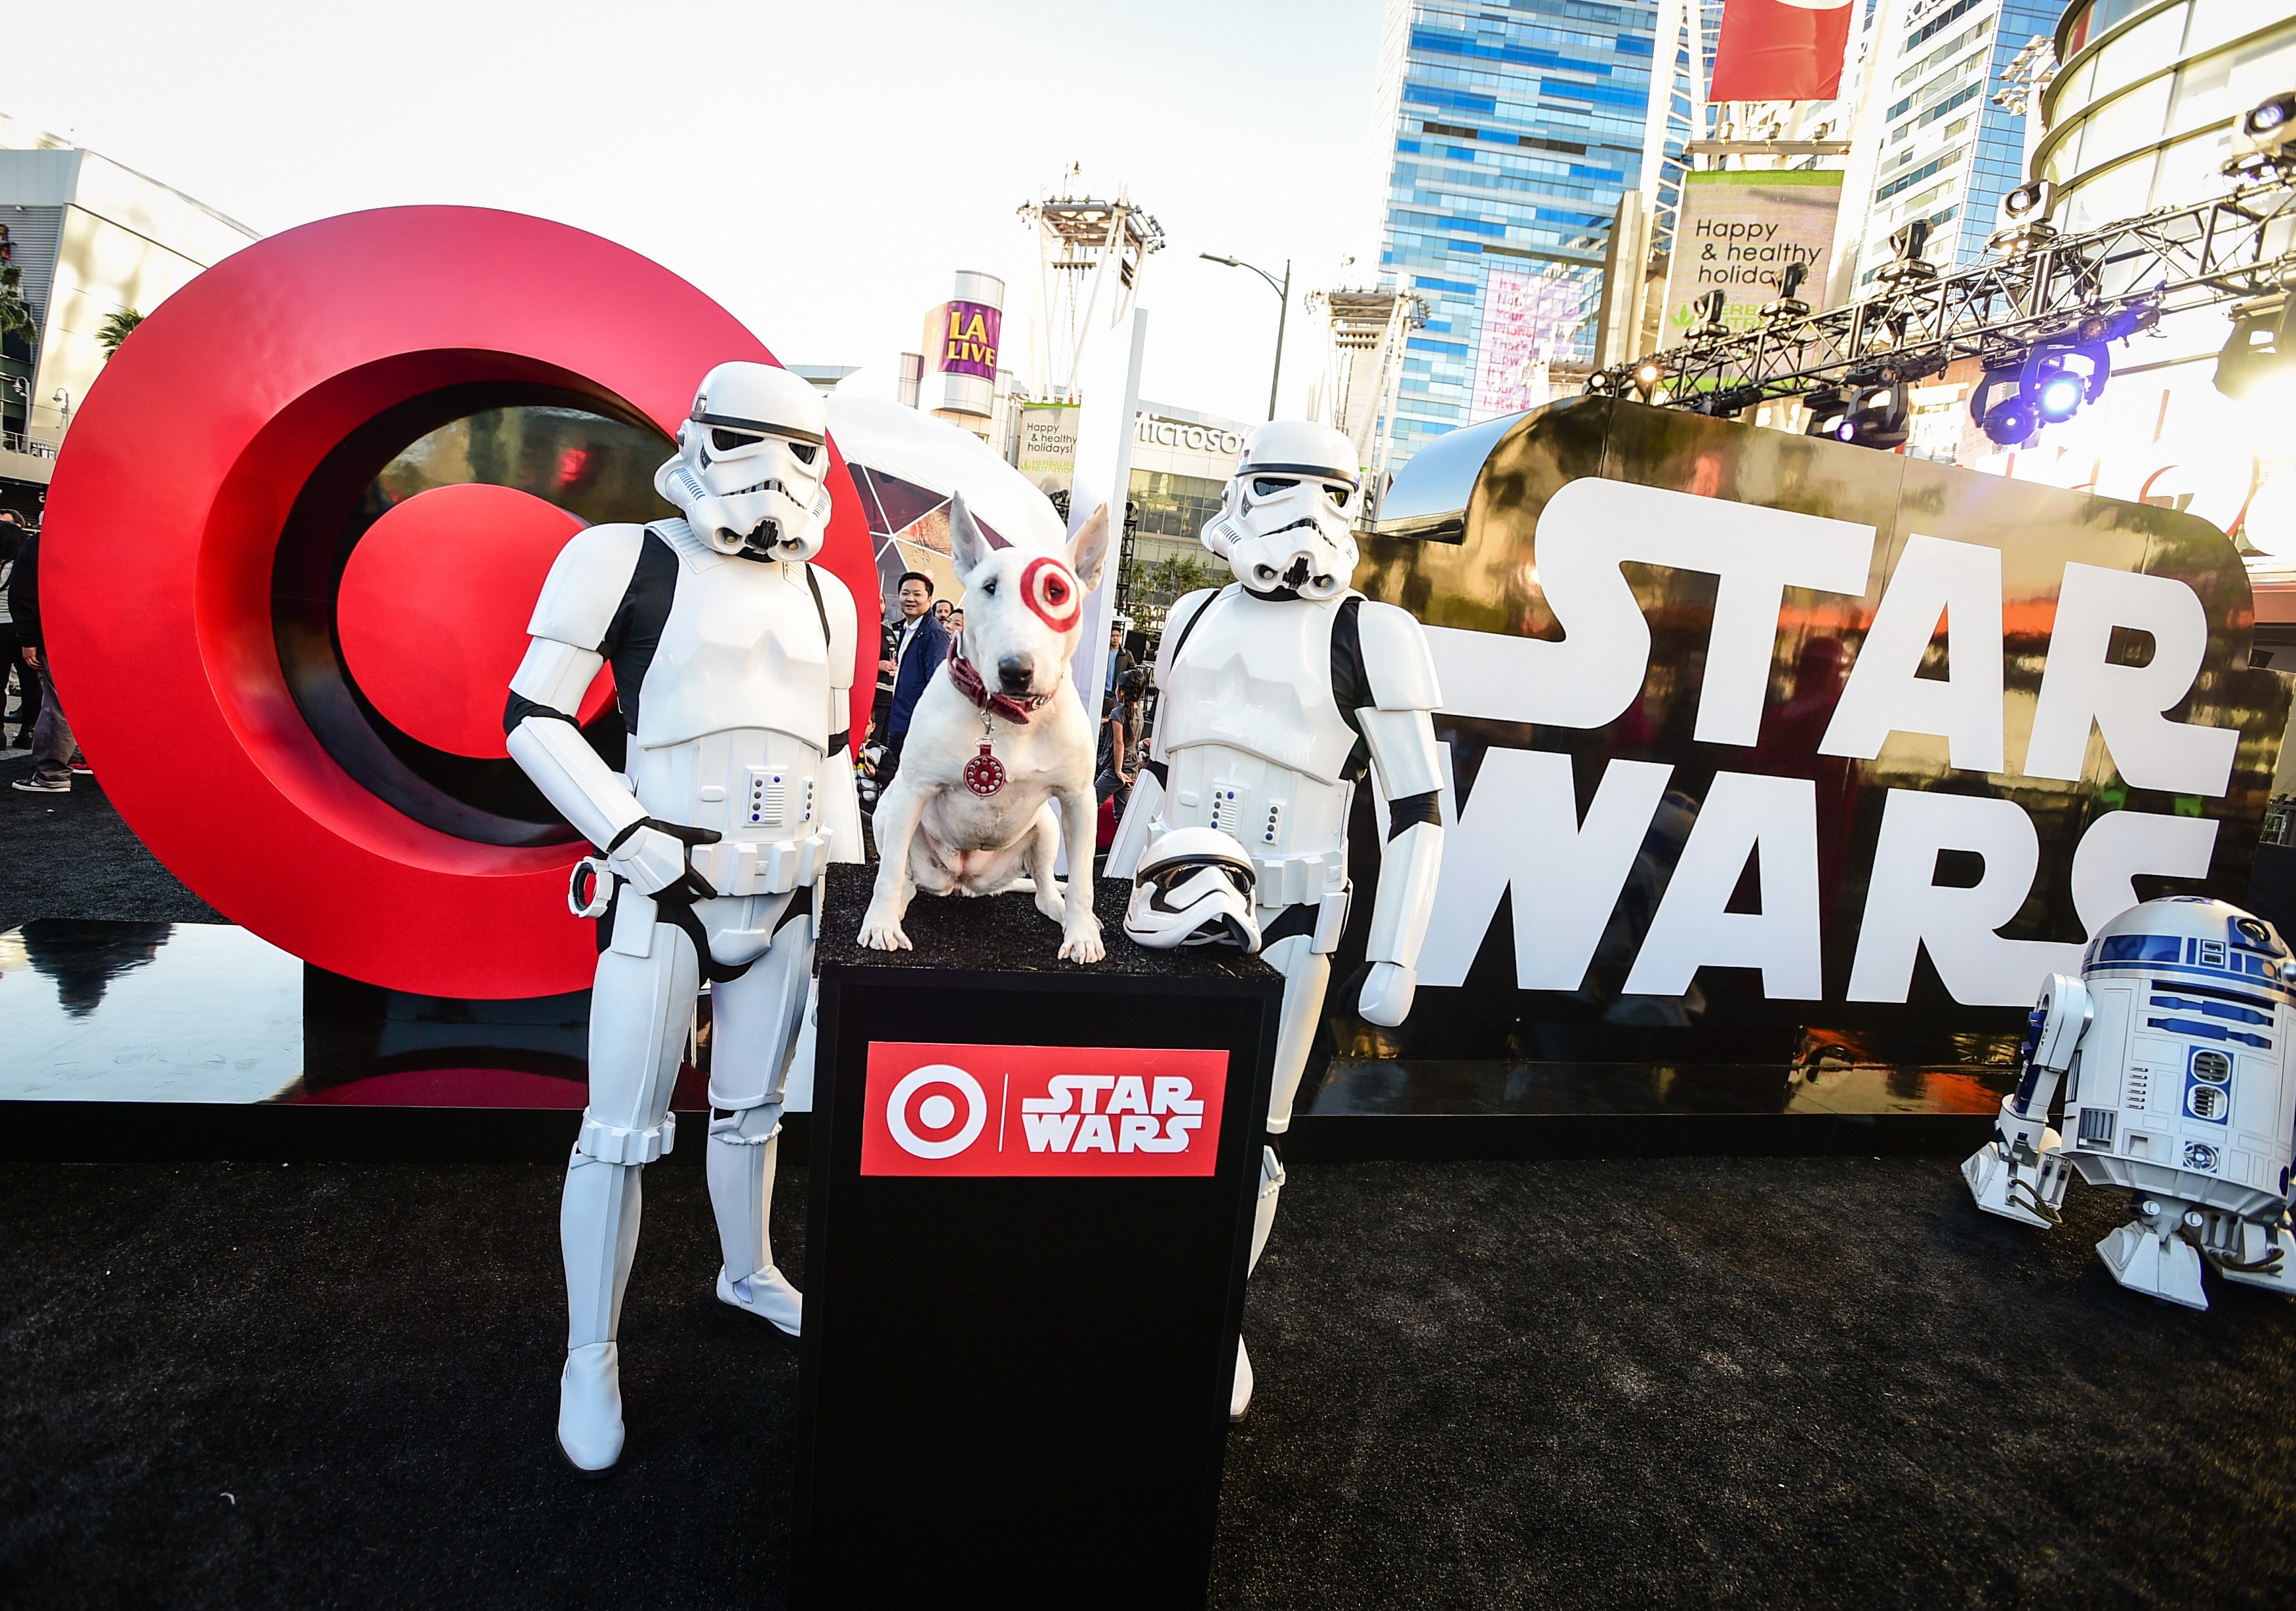 LOS ANGELES, CA - DECEMBER 12: A general view of atmosphere is seen at the Target & Star Wars Galactic Experience at L.A. LIVE on December 12, 2015 in Los Angeles, California. (Photo by Jason Kempin/Getty Images for Target)